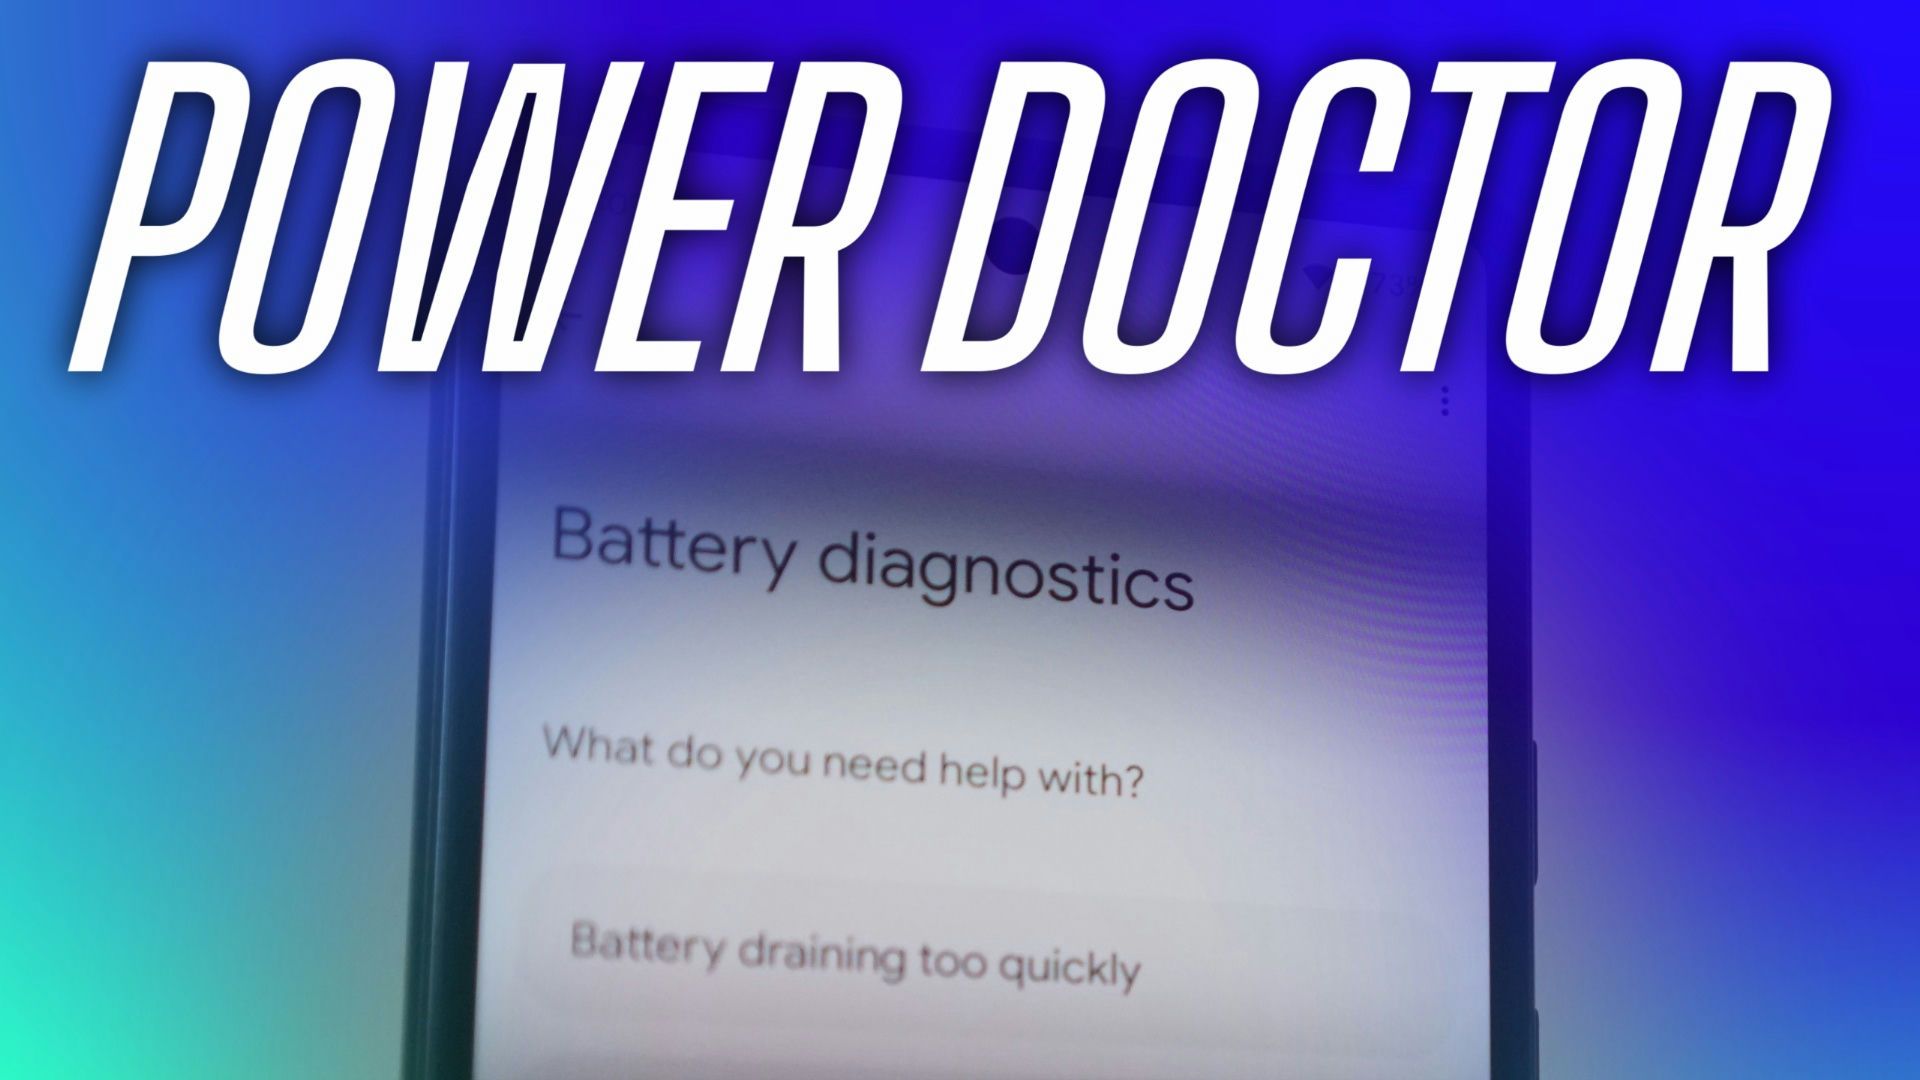 How to check your phone's battery health video thumbnail